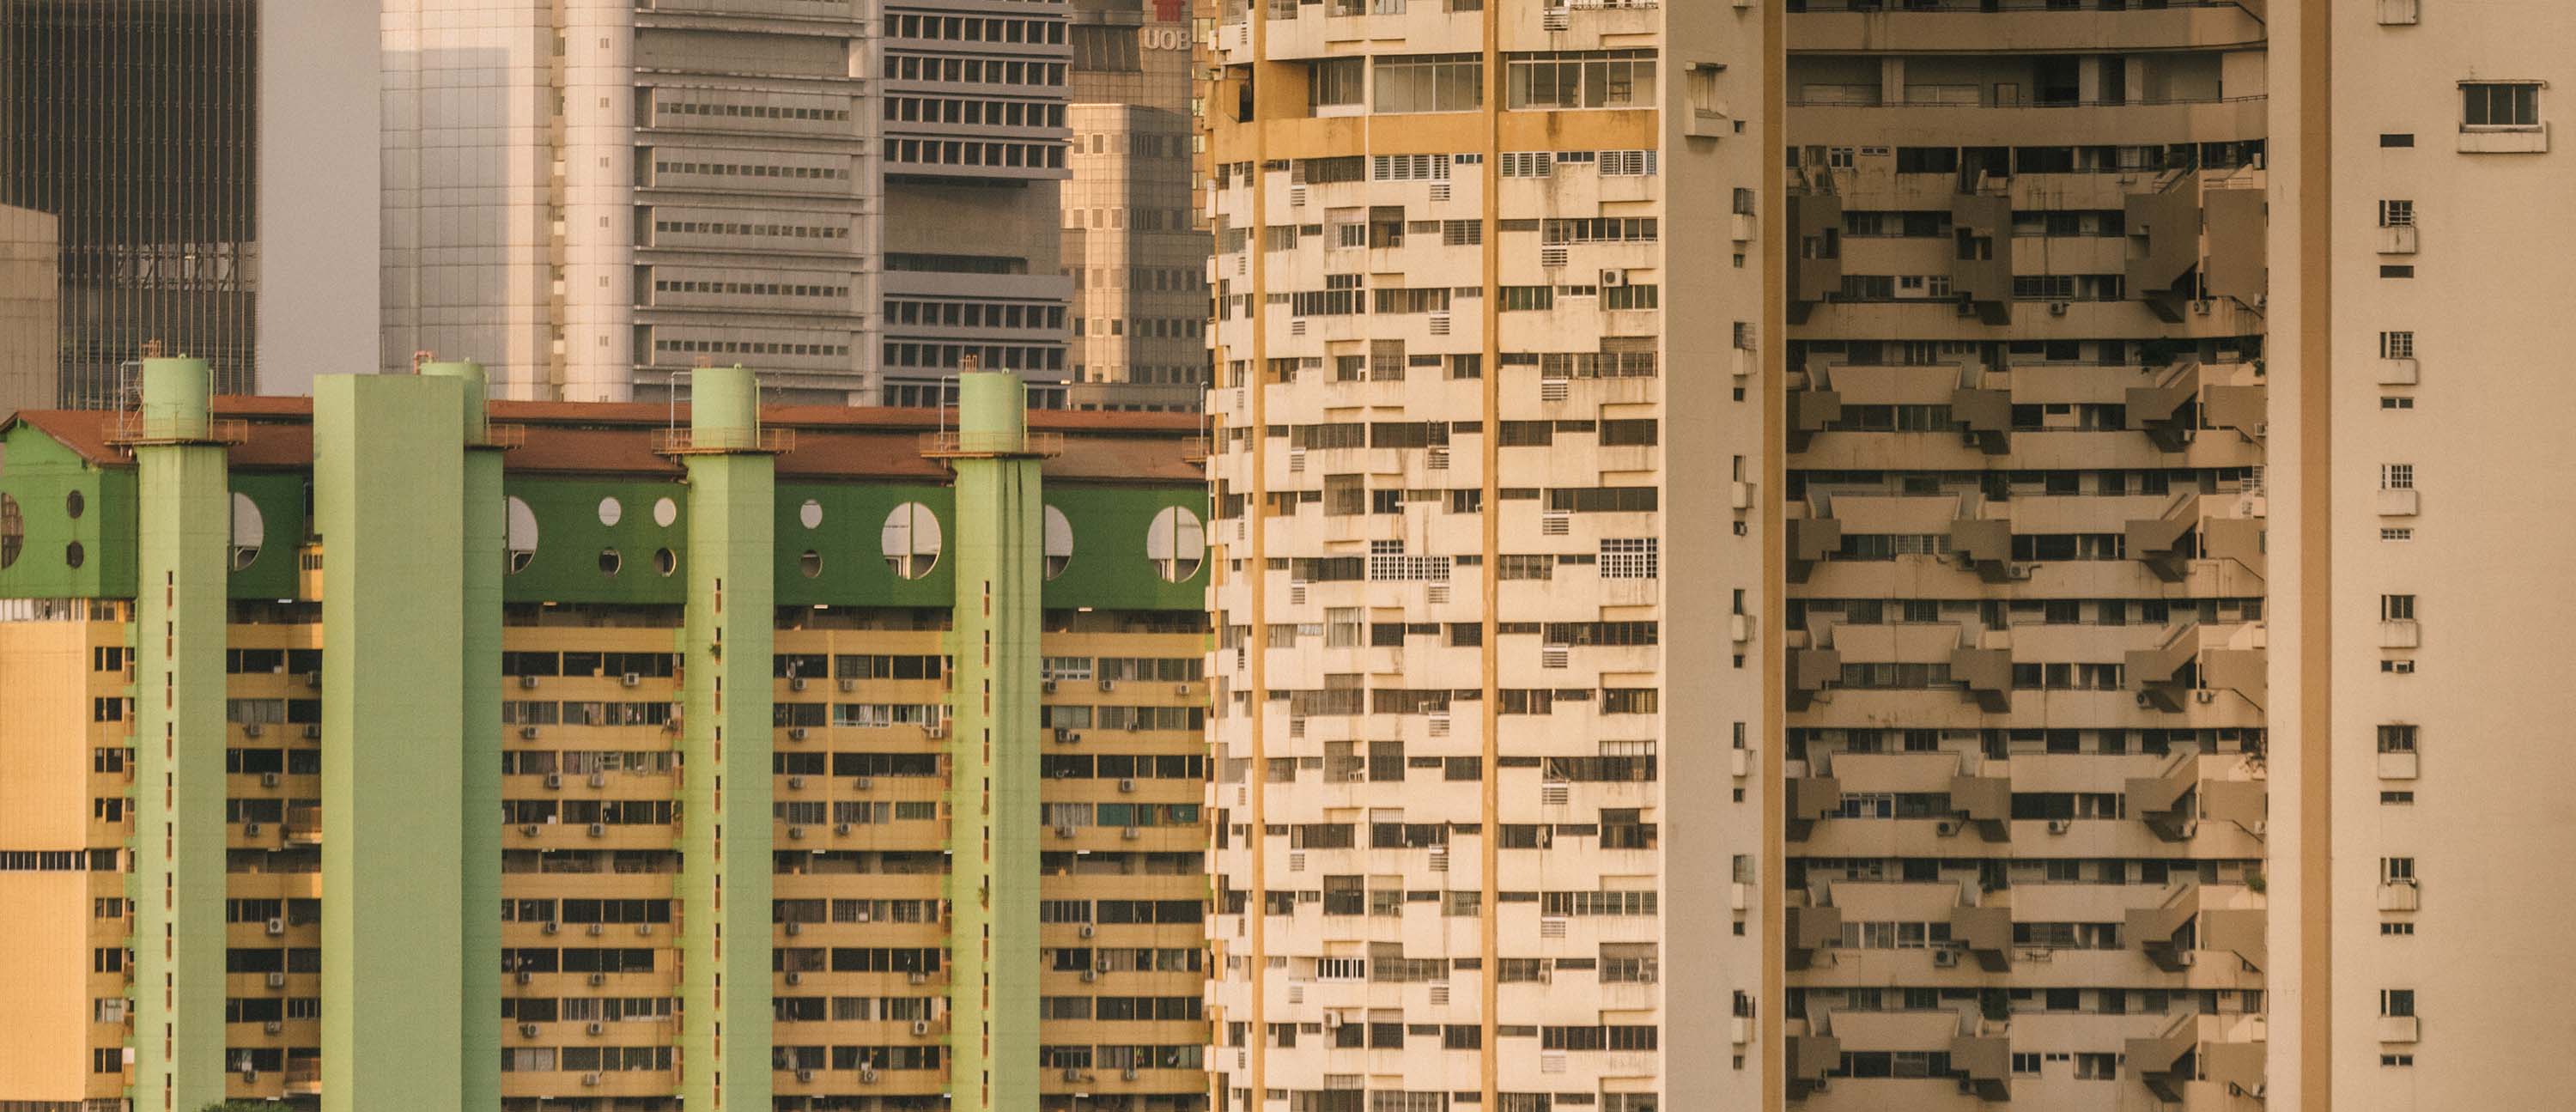 Lost Singapore Architecture: Pearl Bank Apartments